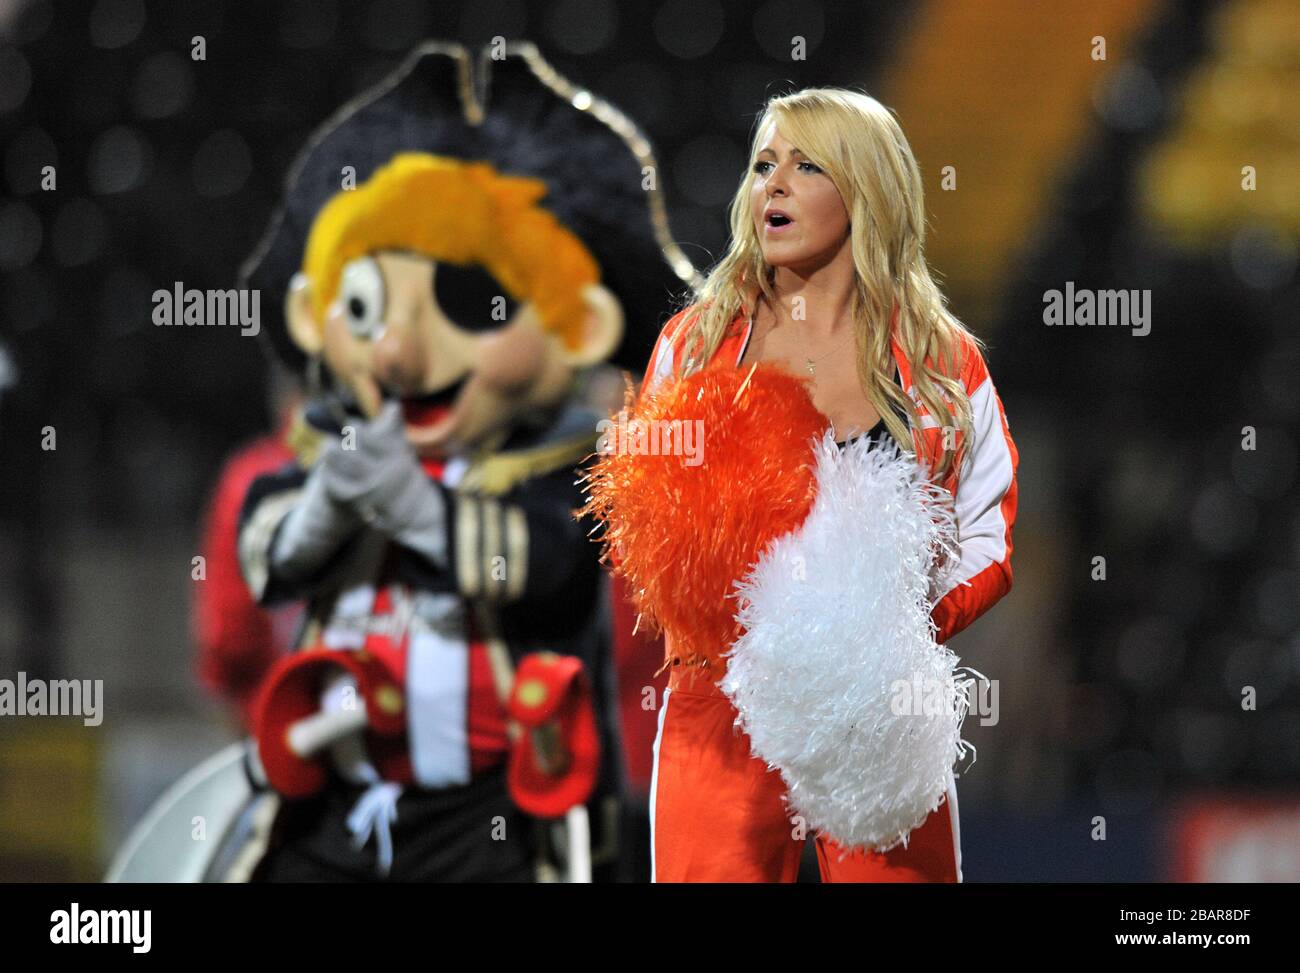 A Hooters cheerleader before the game as Sheffield United mascot Captain Blade looks on behind Stock Photo